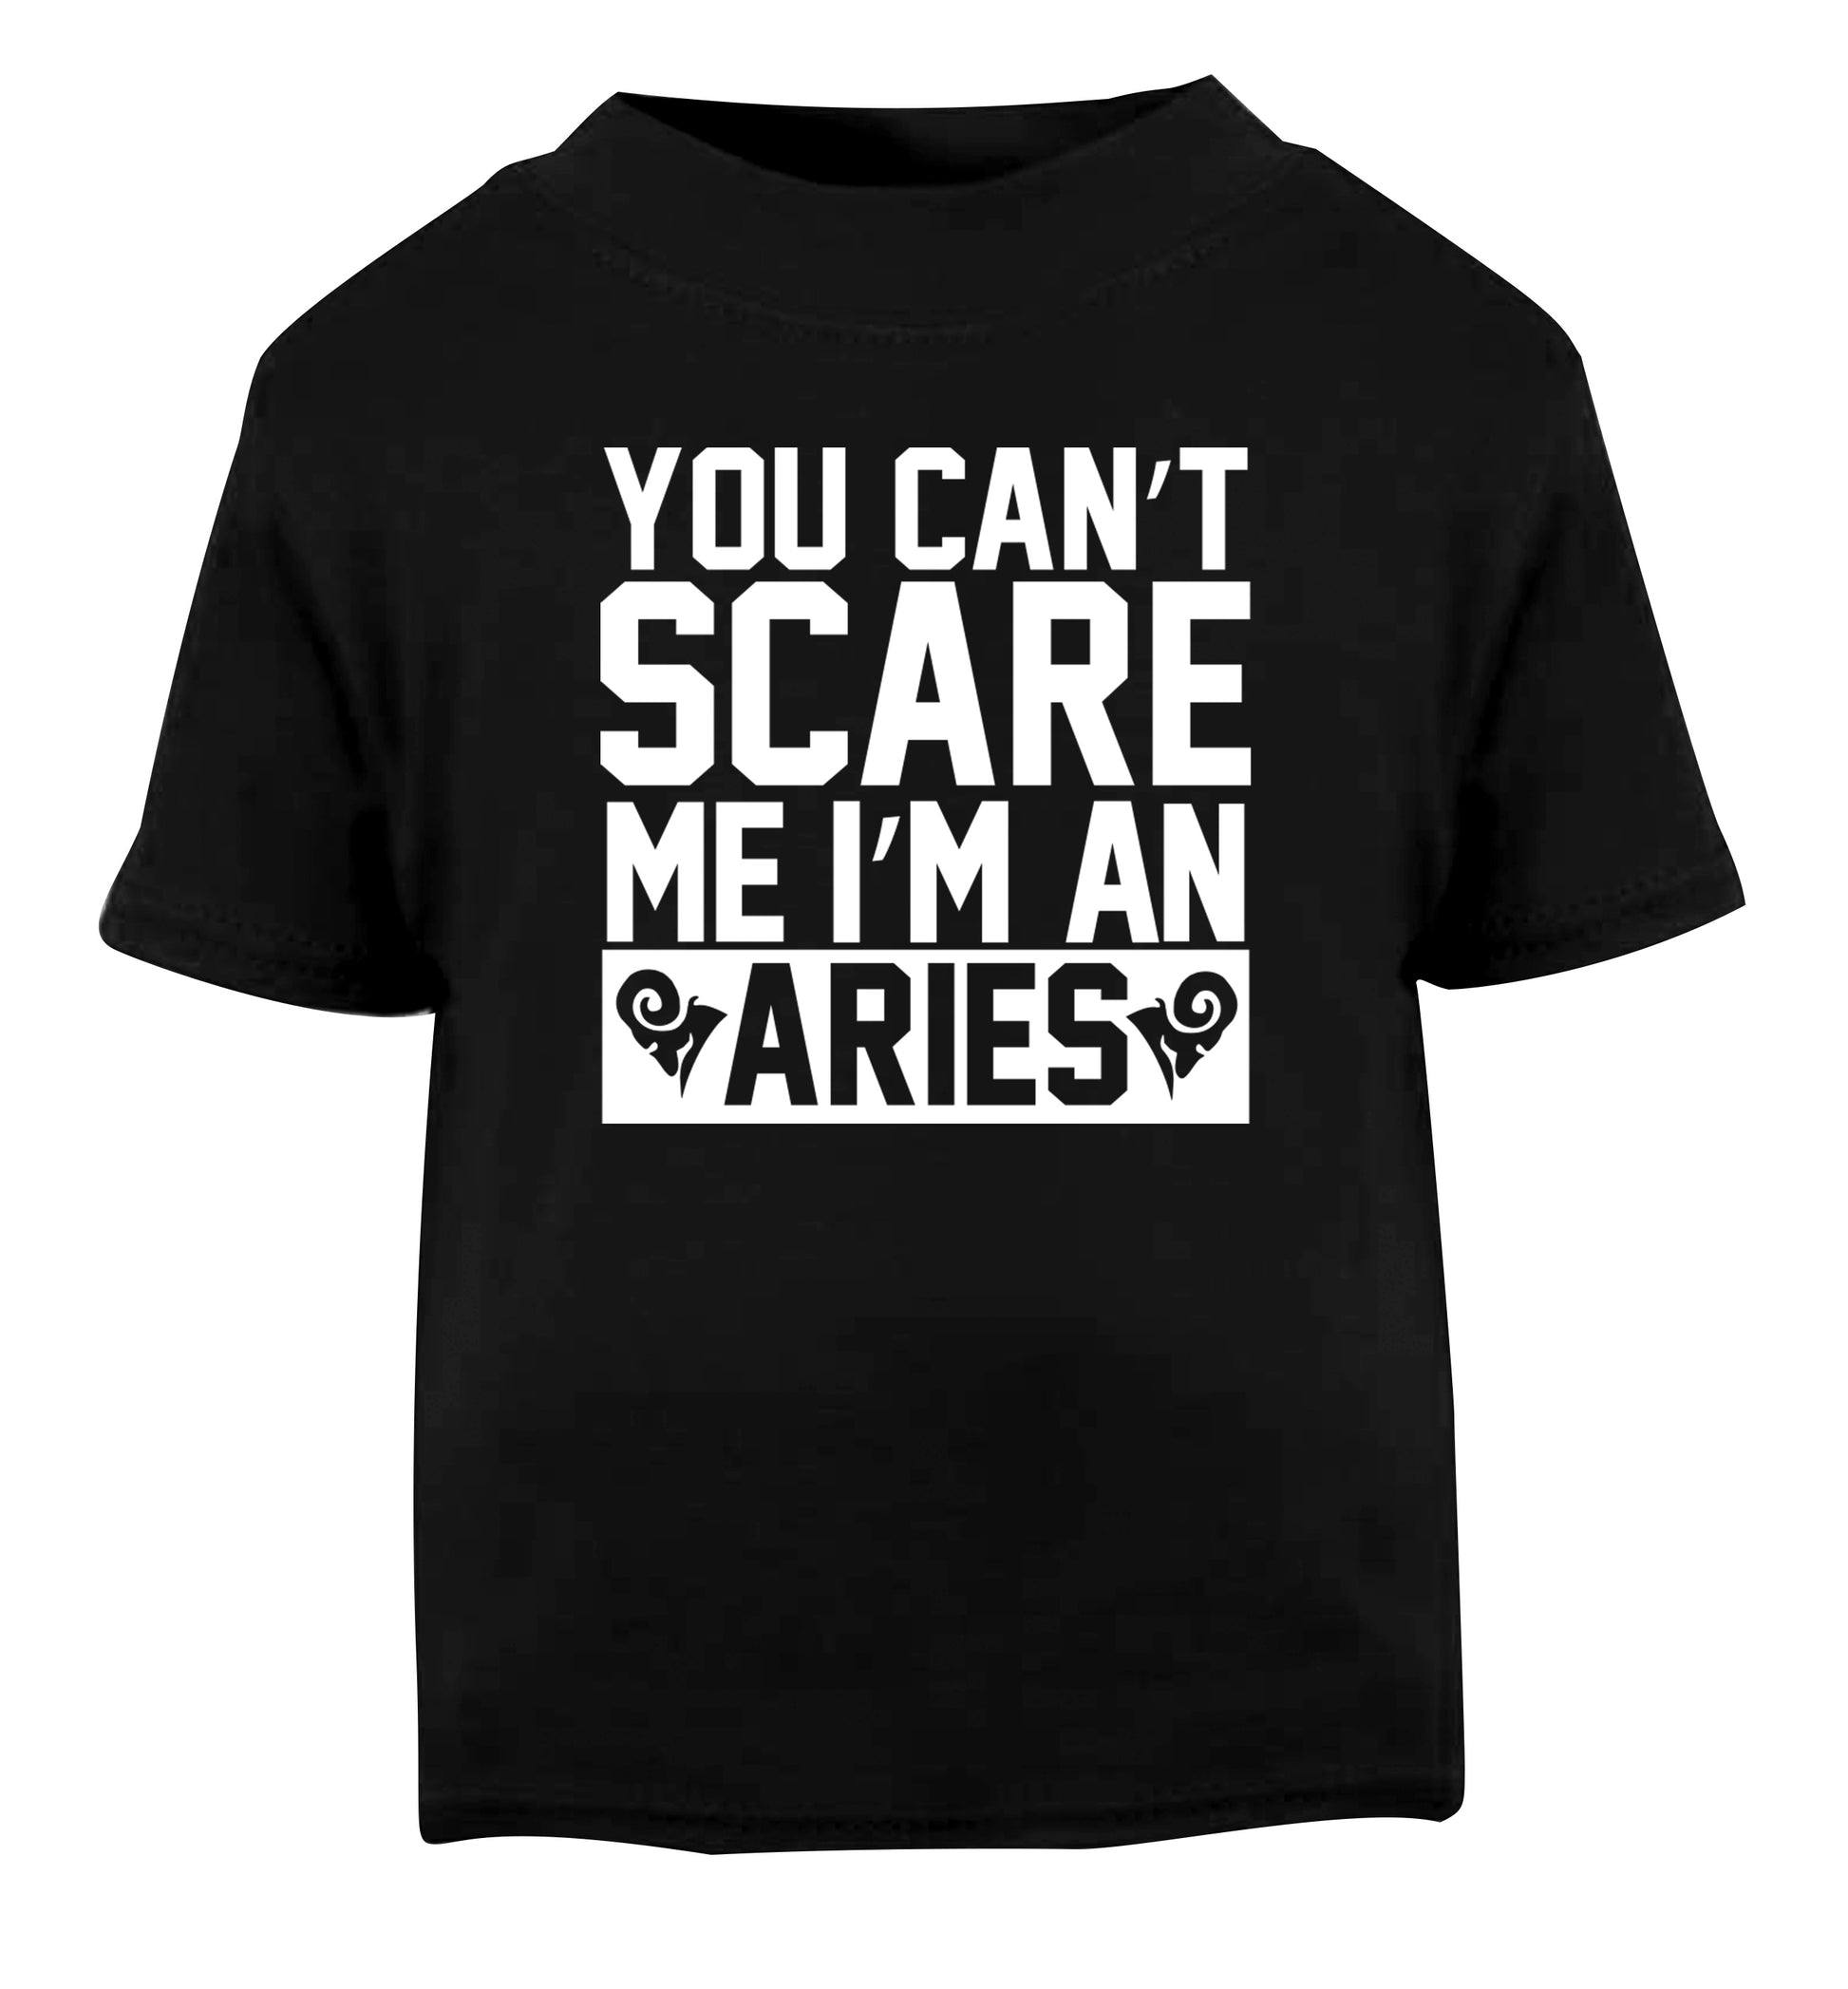 You can't scare me I'm an aries Black Baby Toddler Tshirt 2 years